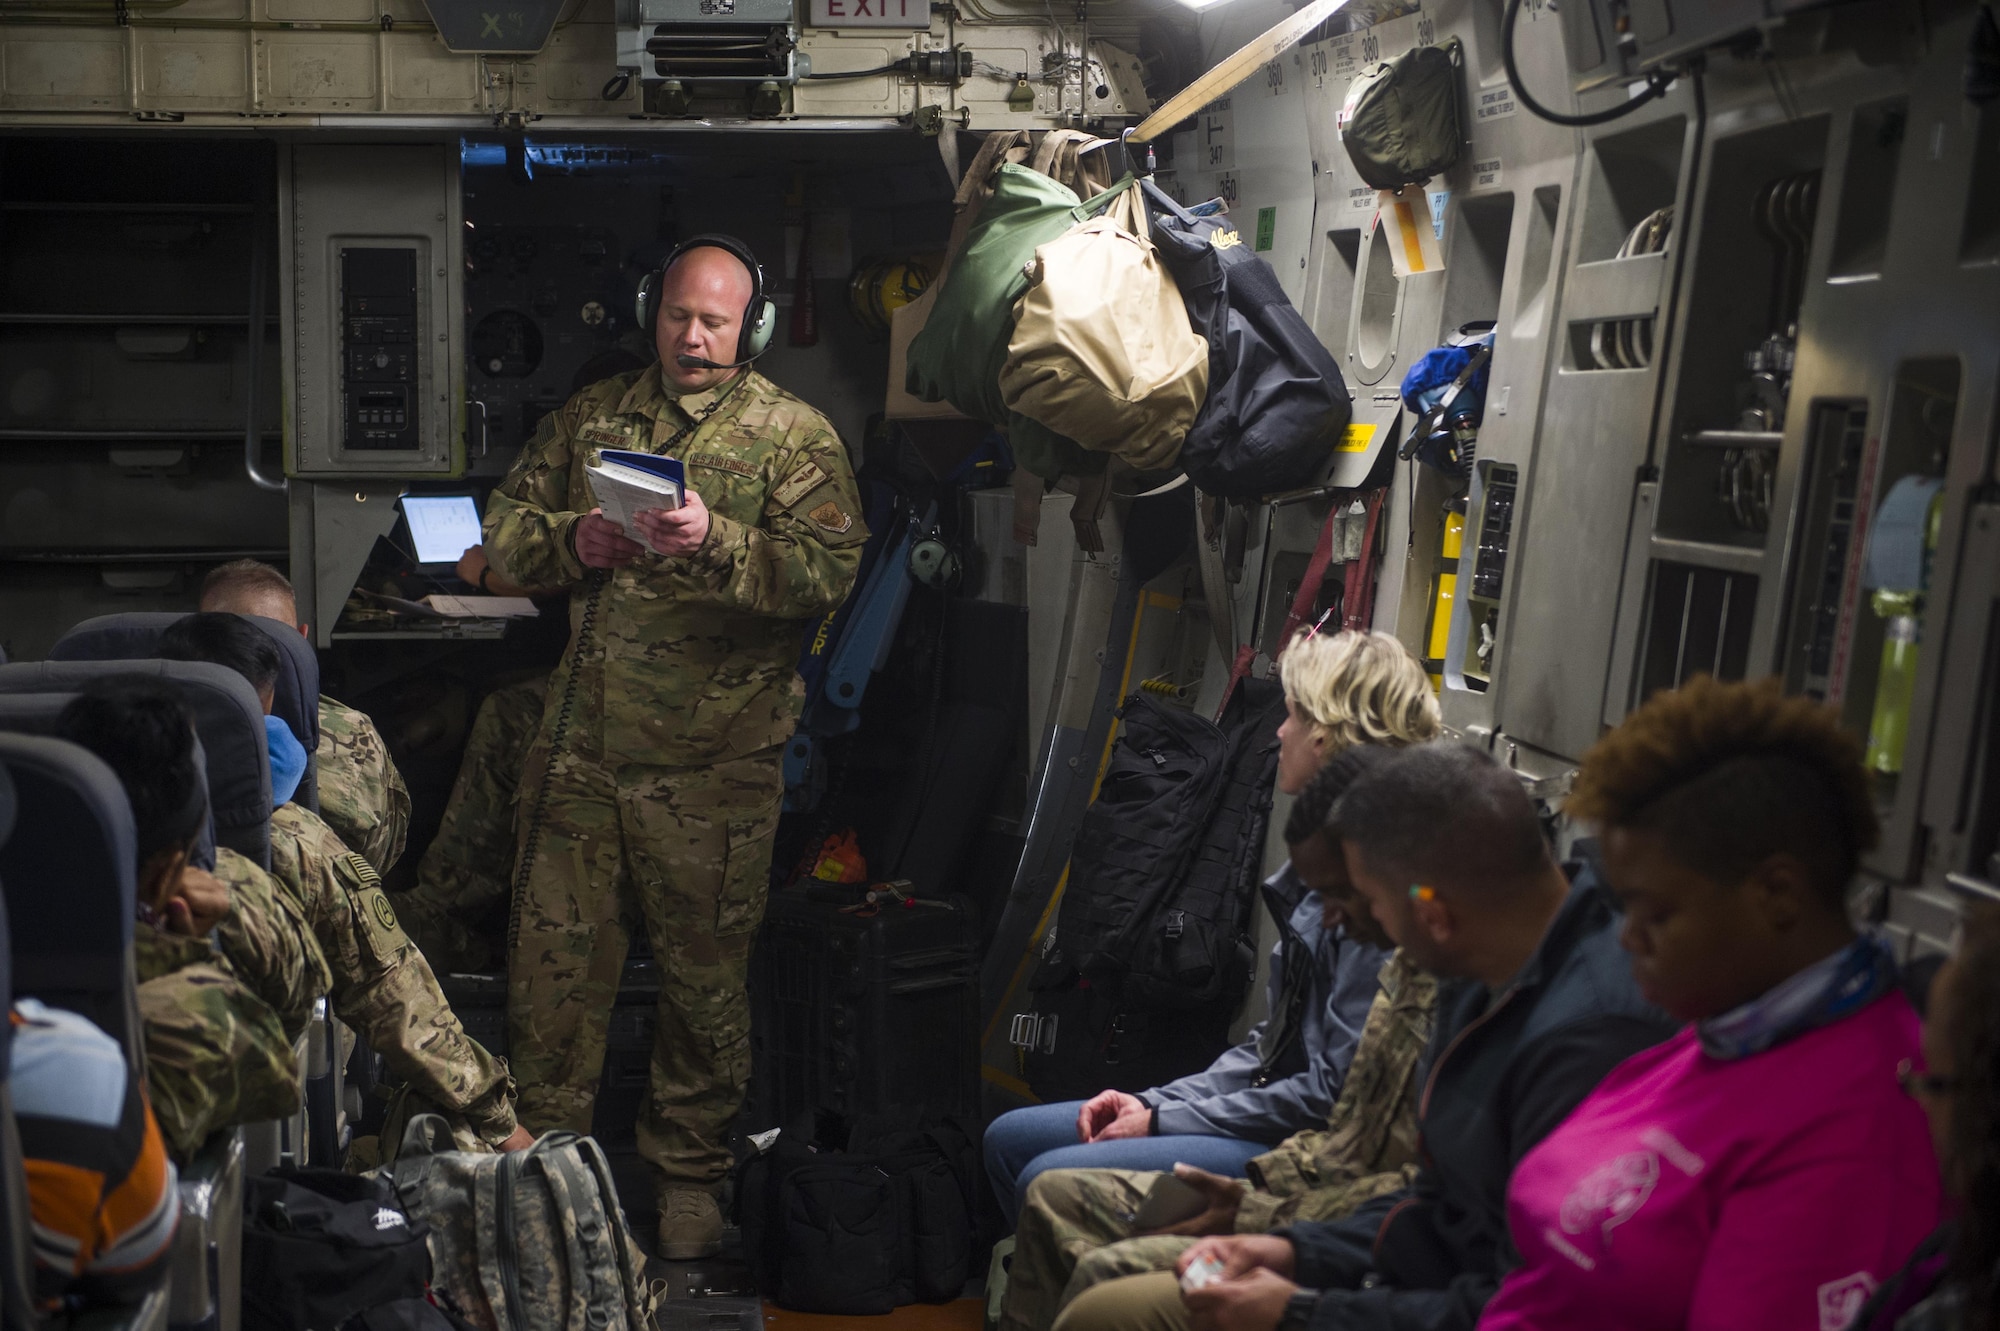 A U.S. Air Force C-17 Globemaster III loadmaster briefs passengers on in-flight emergency procedures during a transport mission in support of Operation Freedom Sentinel in Southwest Asia Sept. 30, 2016. The C-17 is the newest most flexible cargo aircraft to enter the airlift force. The C-17 is capable of rapid strategic delivery of troops and all types of cargo to main operating bases or directly to forward bases in the deployment area. (U.S. Air Force photo by Staff Sgt. Douglas Ellis/Released)